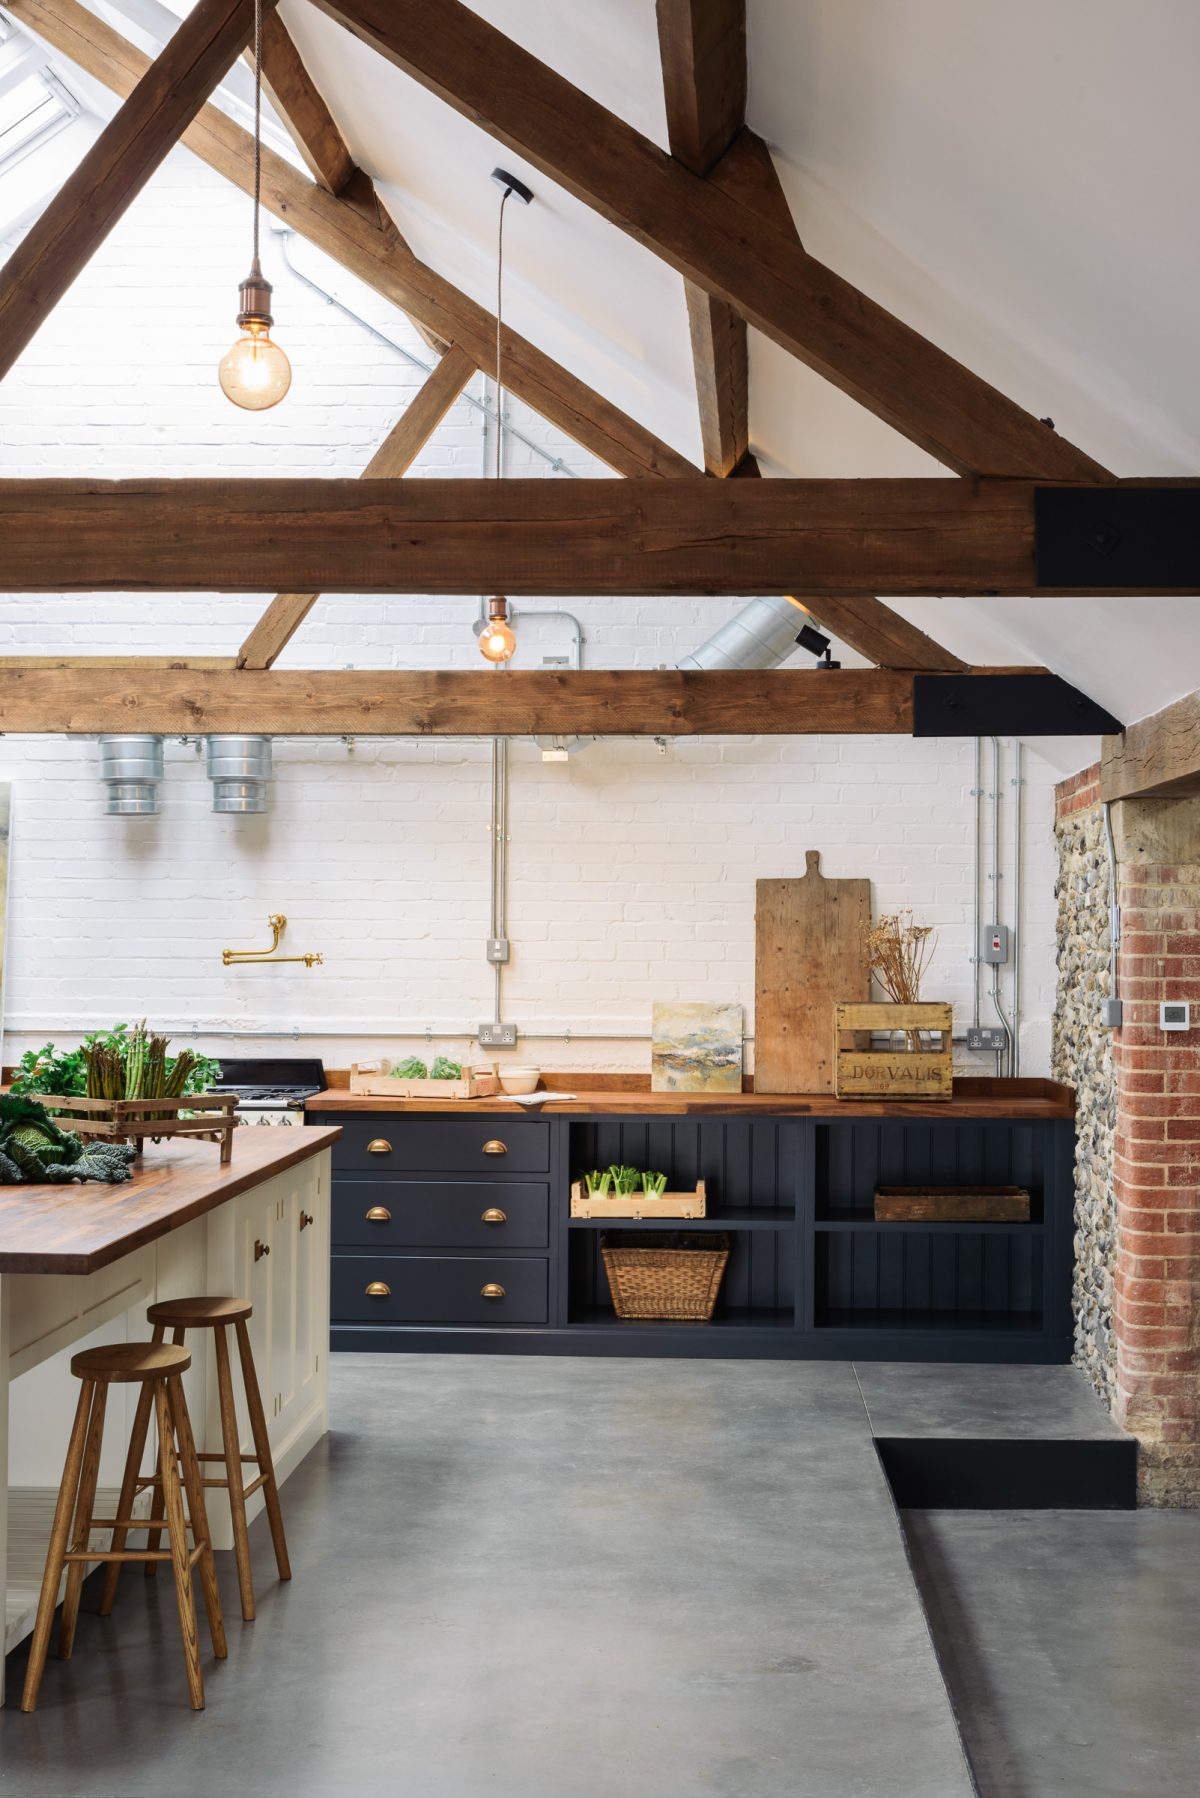 Kitchen Designs With Polished Concrete Floors the cattle shed